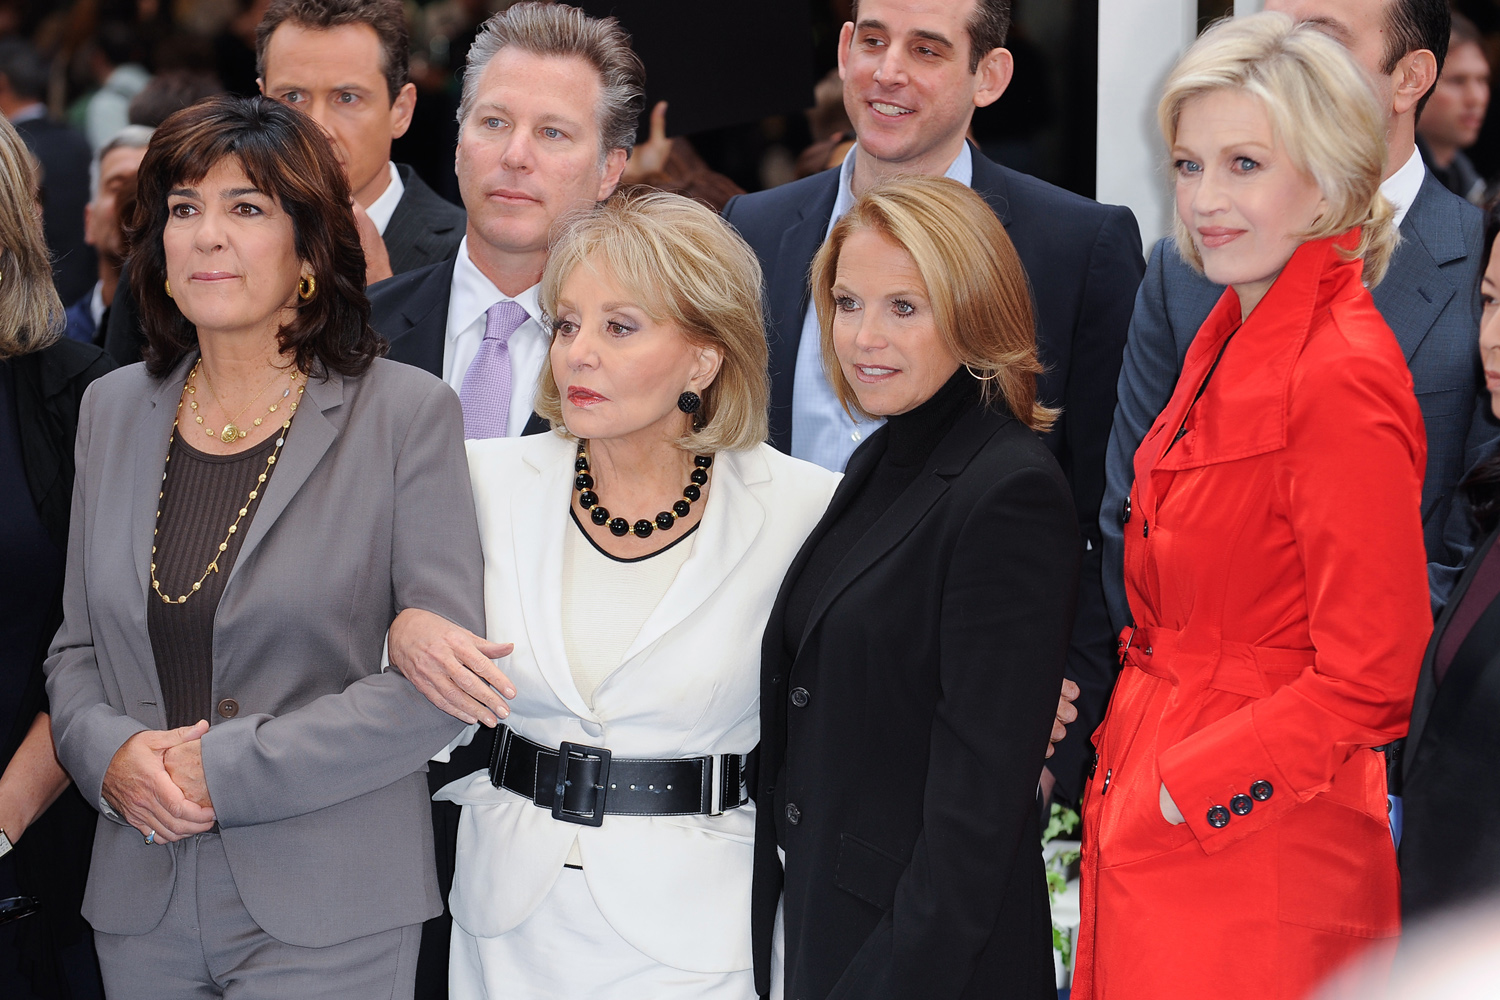 News reporters Christiane Amanpour, Barbara Walters, Katie Couric, and Diane Sawyer tape an interview at "Good Morning America" at the ABC Times Square Studios in New York City, Oct. 3, 2011. (Ray Tamarra—Getty Images)